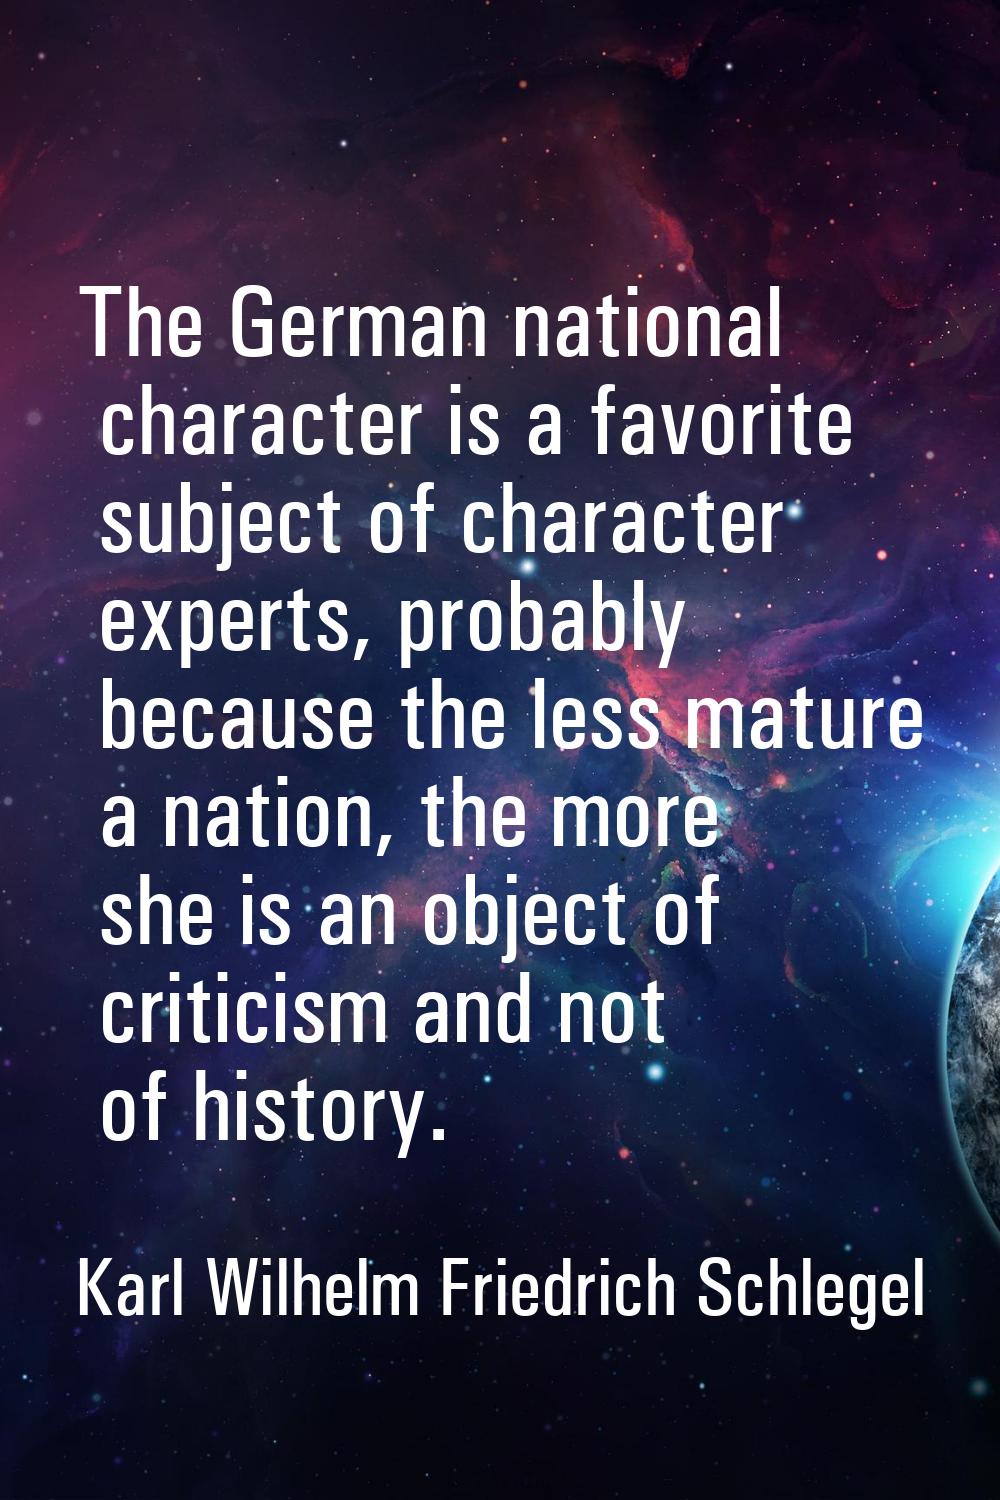 The German national character is a favorite subject of character experts, probably because the less